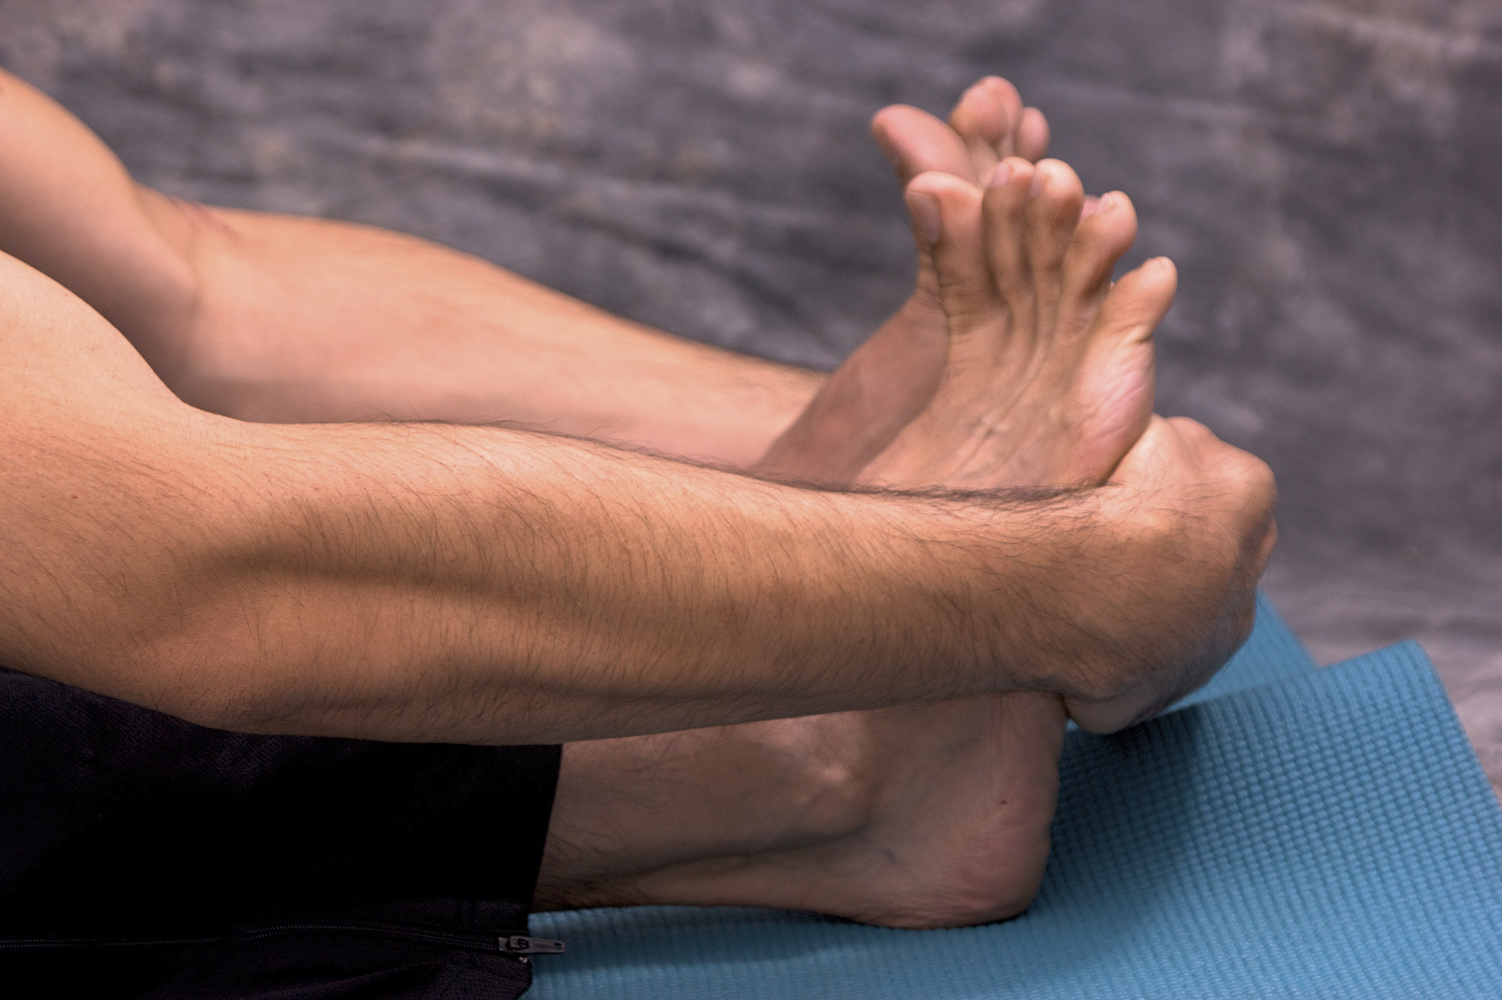 Balance and Control Exercises for Ankle Sprains